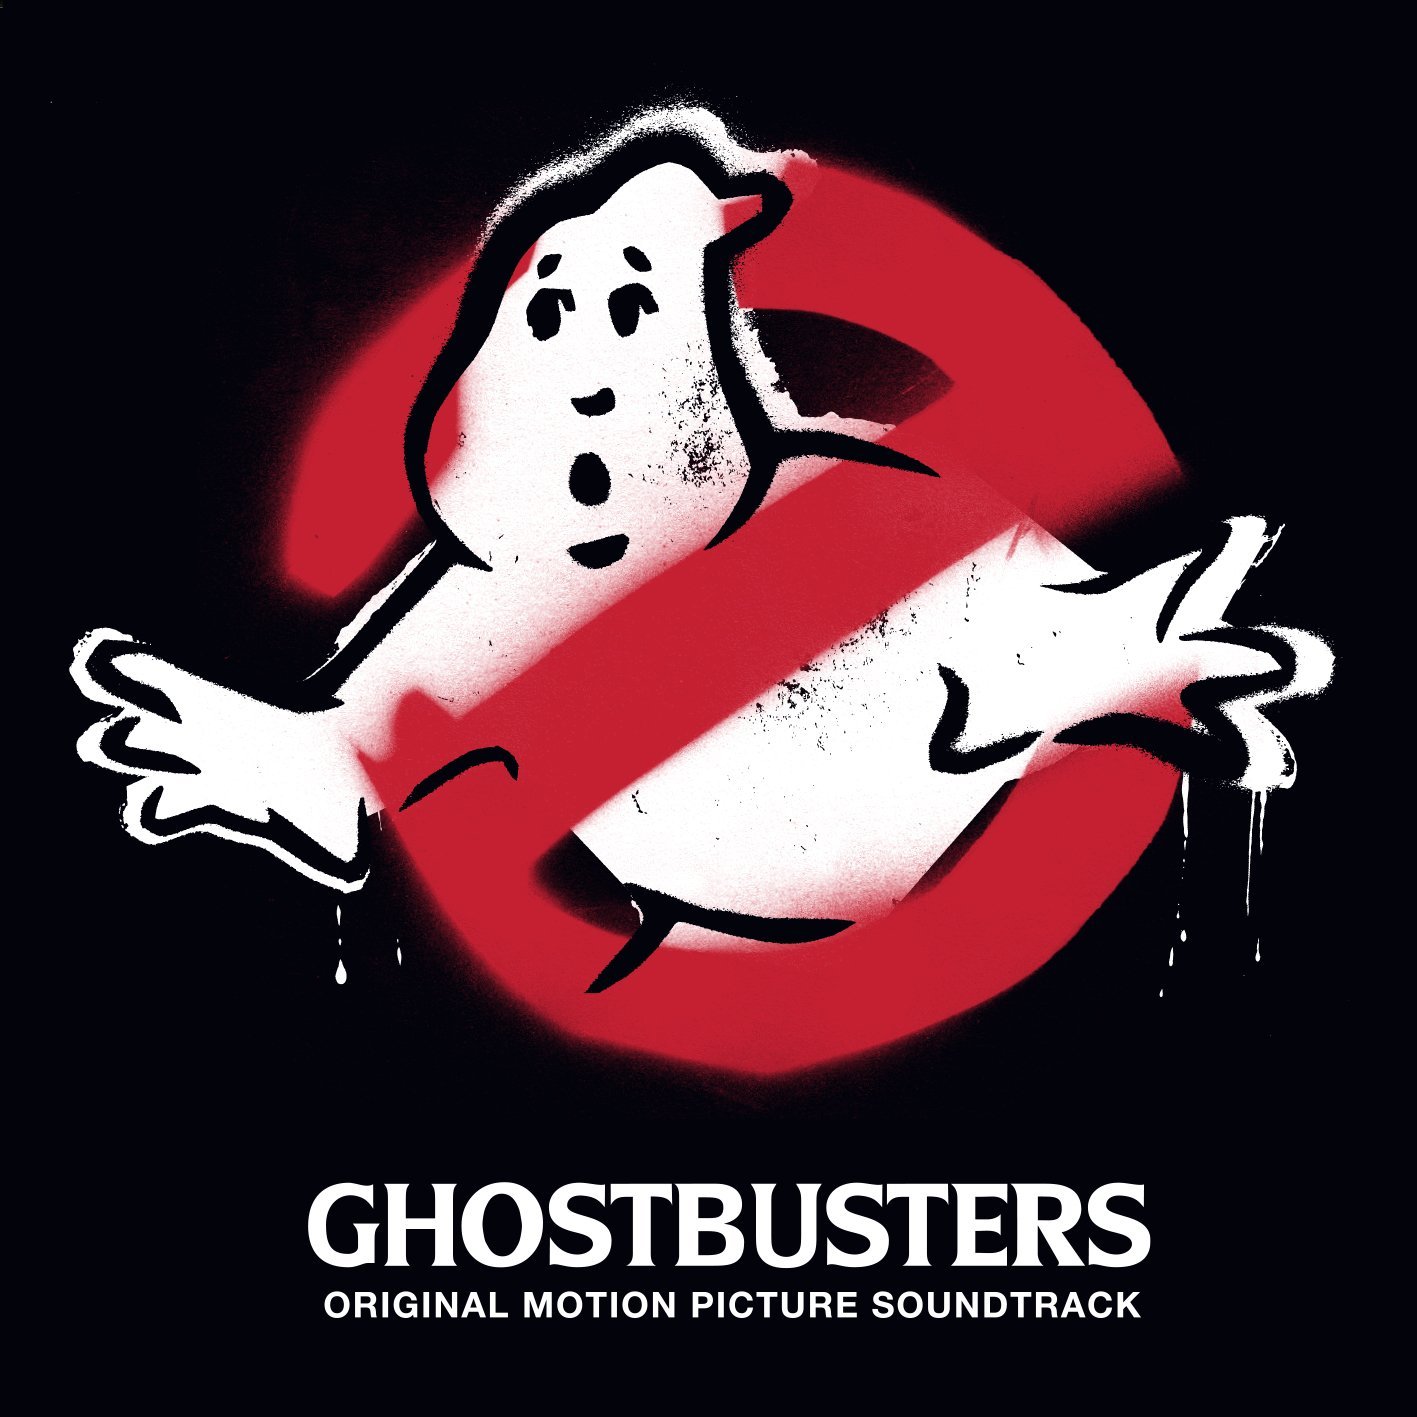 ost 08 16 Ghostbusters